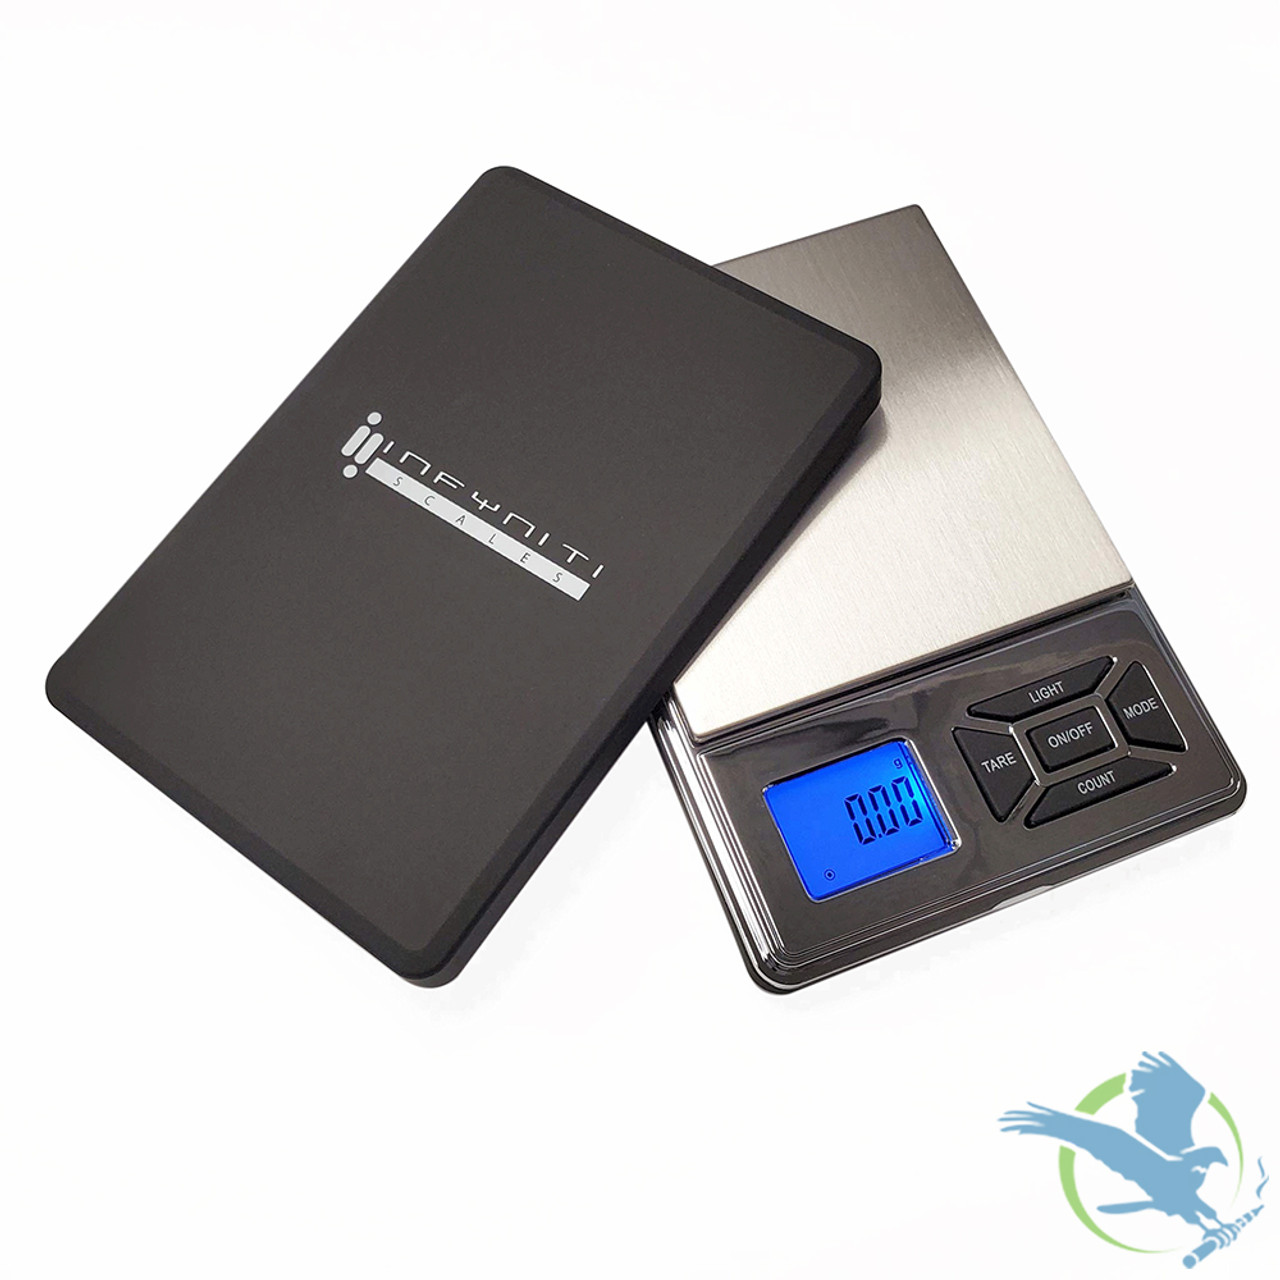 Infyniti Scales Executive Digital Pocket Scale 50g x 0.01g (MSRP $15.00)